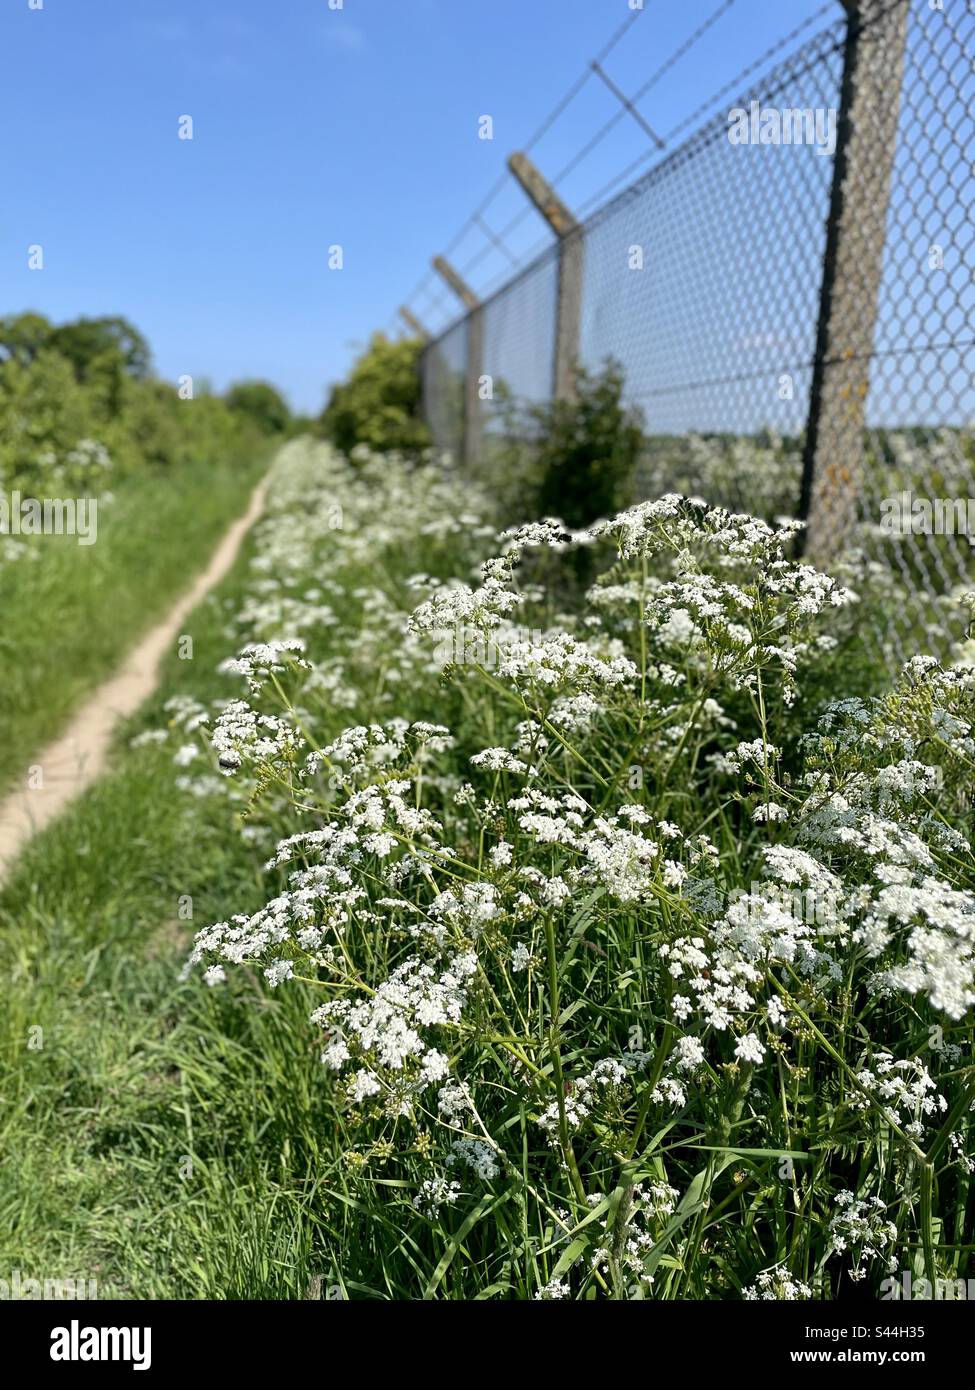 Cow Parsley growing beside a chainlink fence. Stock Photo